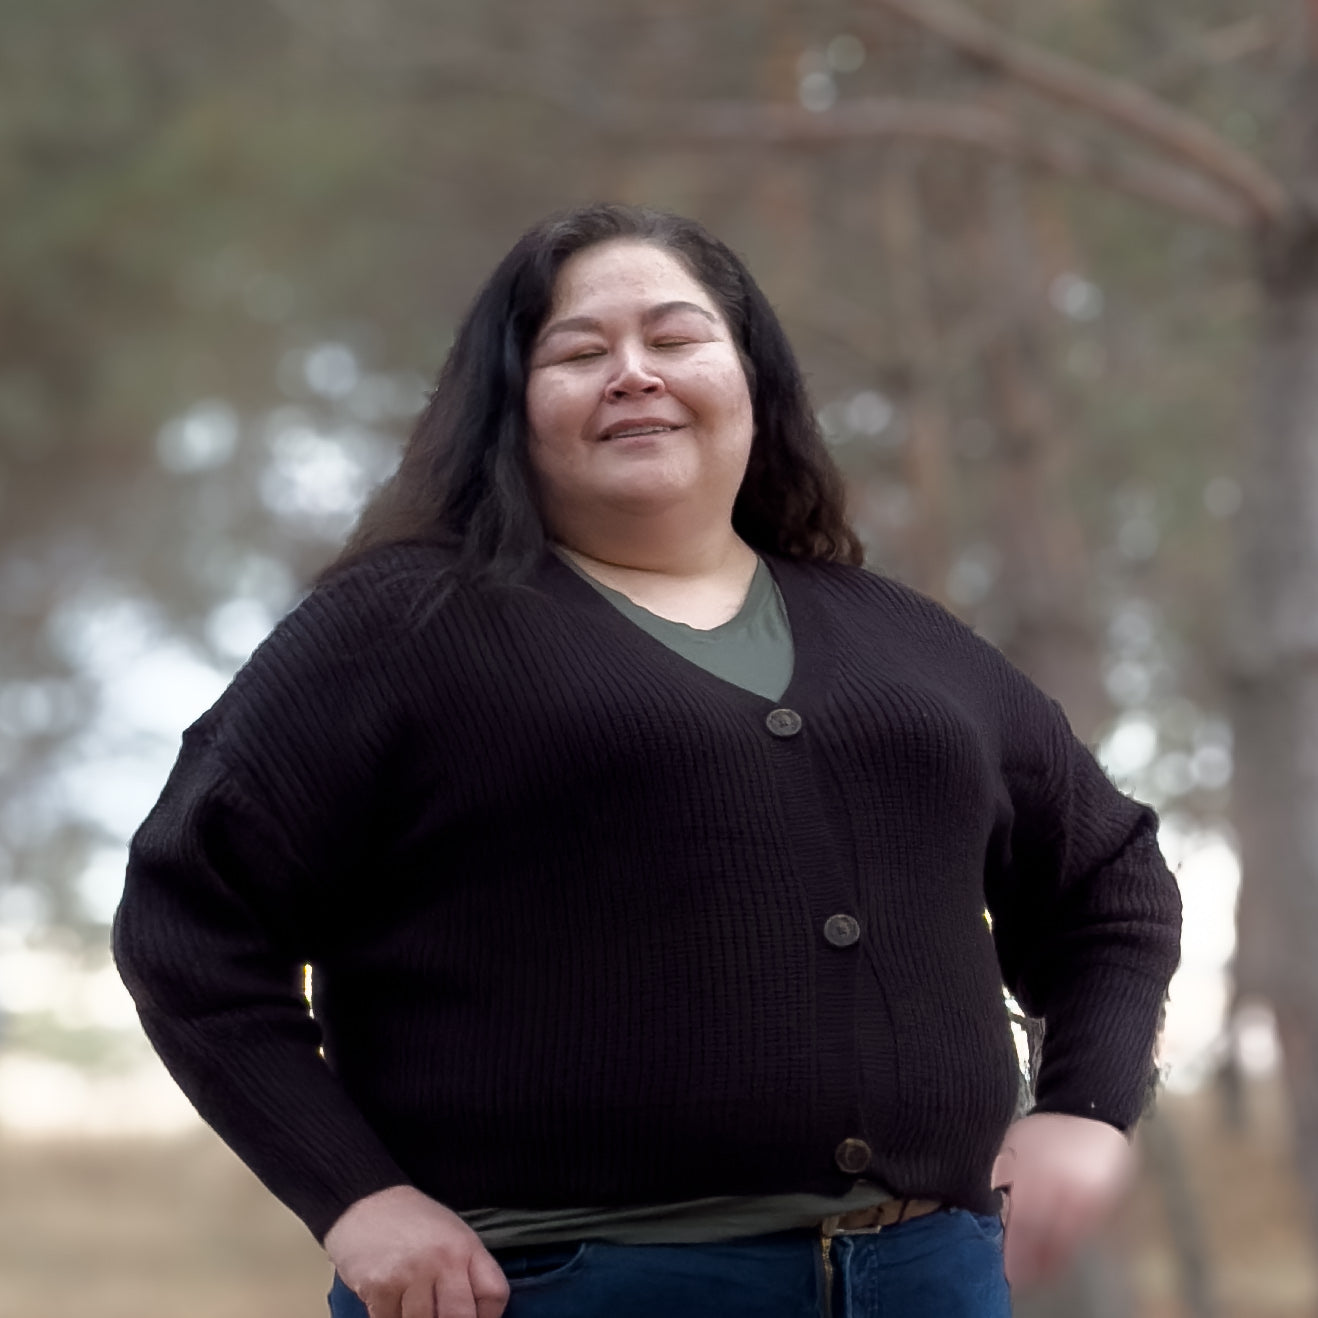 Plus sized woman wearing a black V-necked knit cardigan 